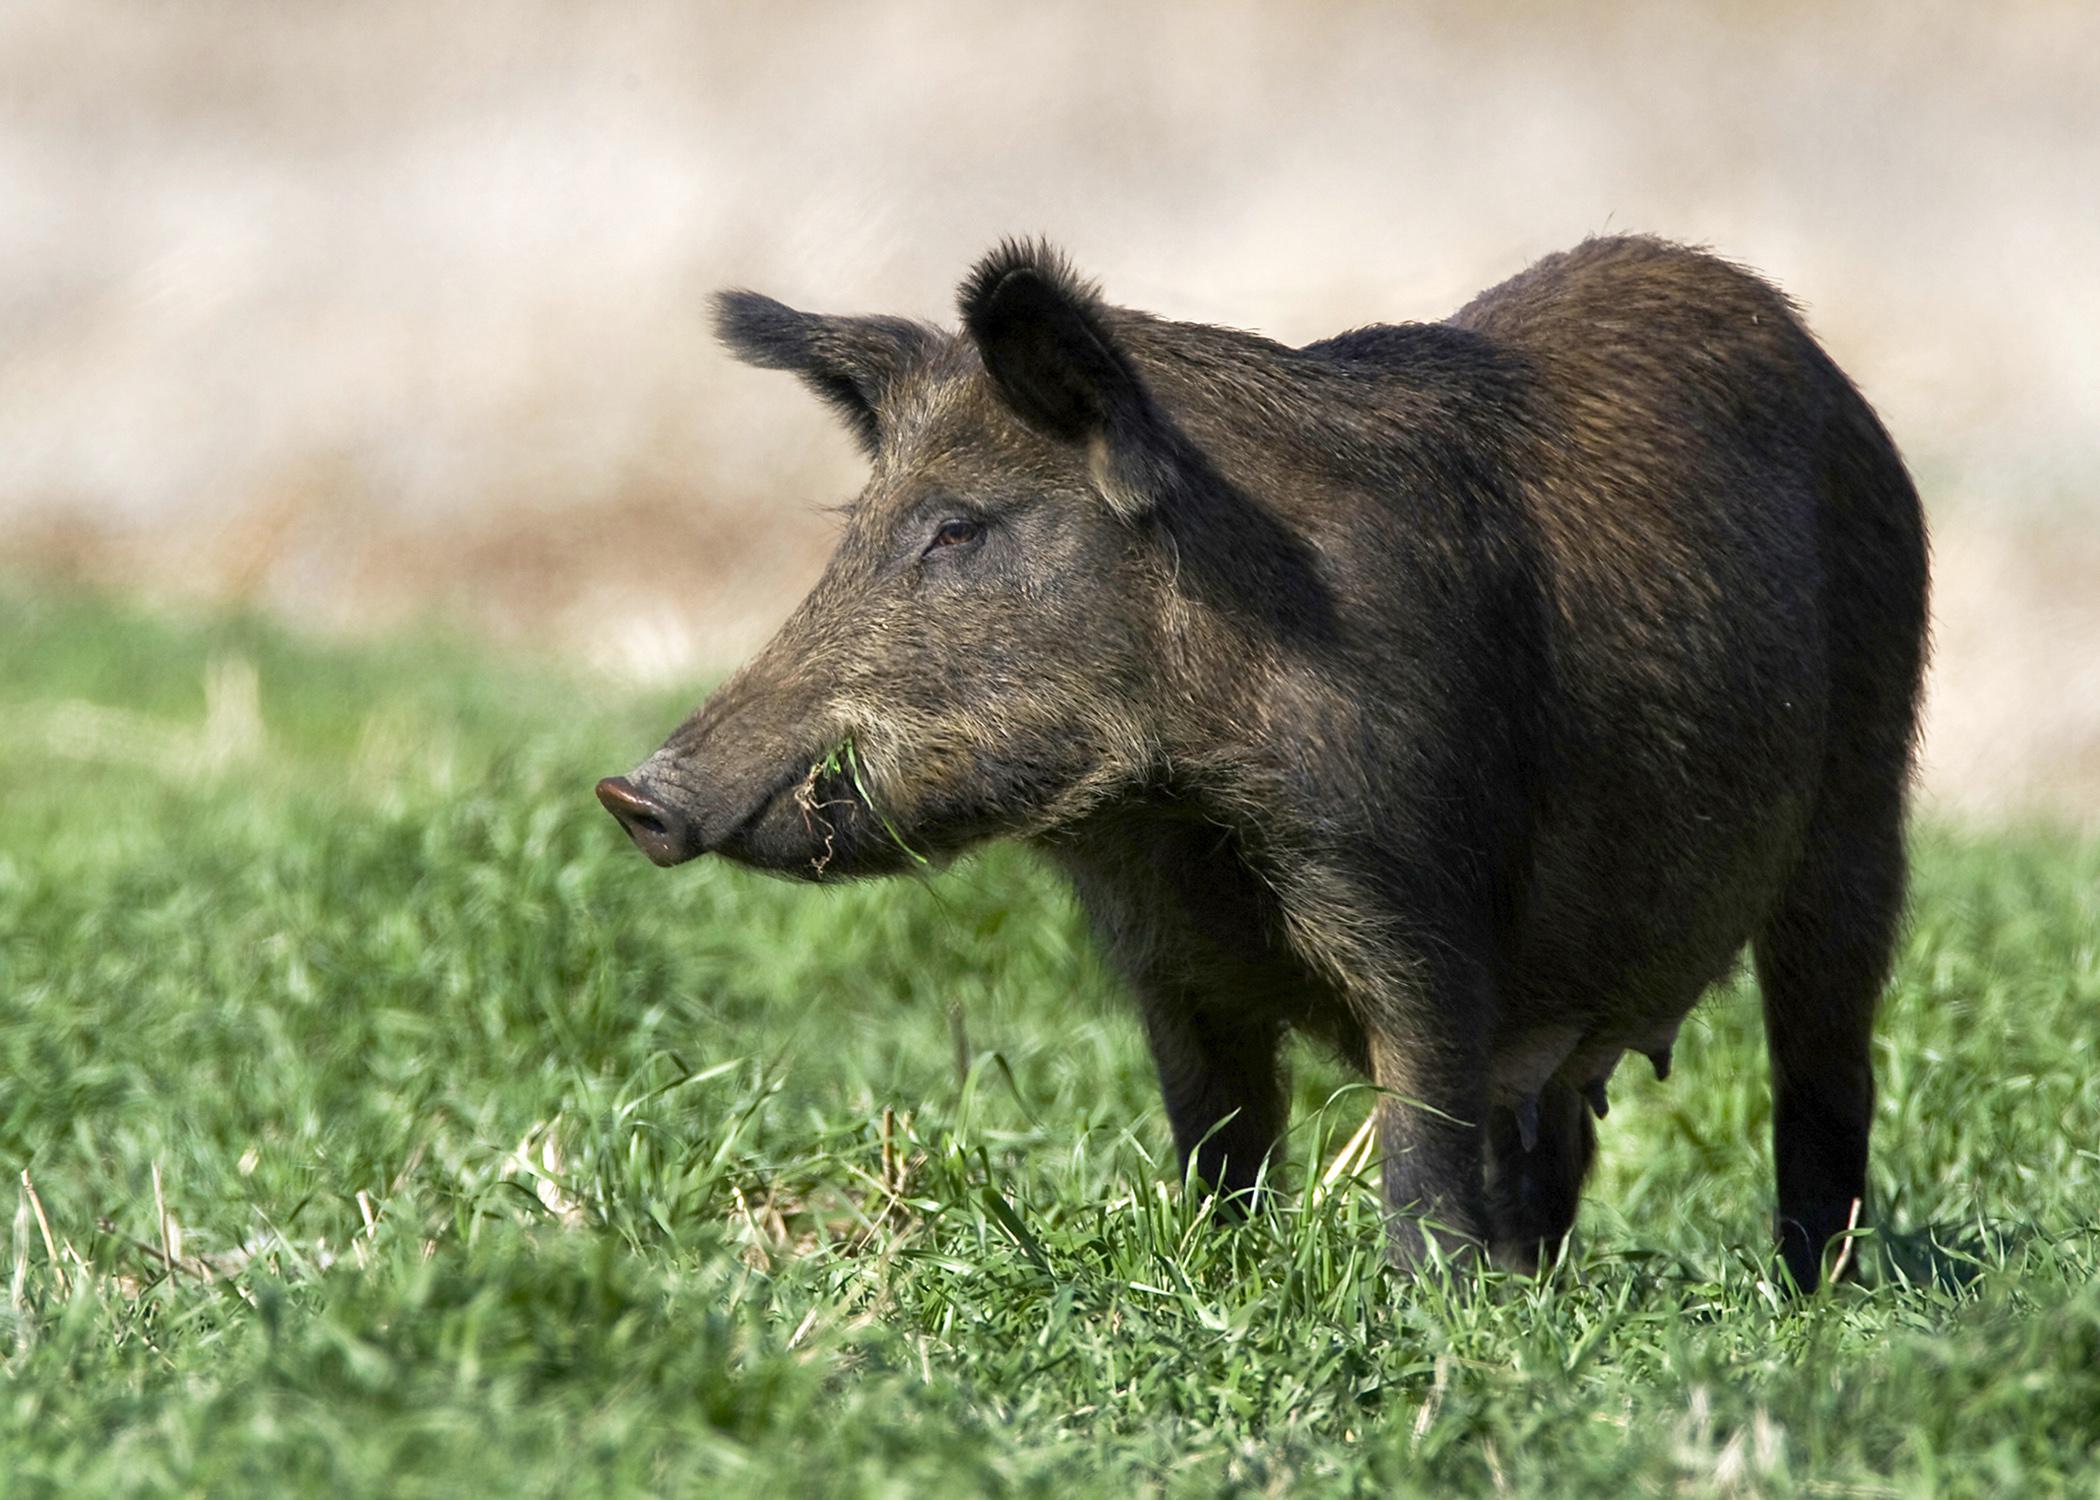 Wild hogs reproduce quickly, have few natural predators and can cause damage and spread disease, making them more than a mere nuisance to humans. (Photo by iStock)